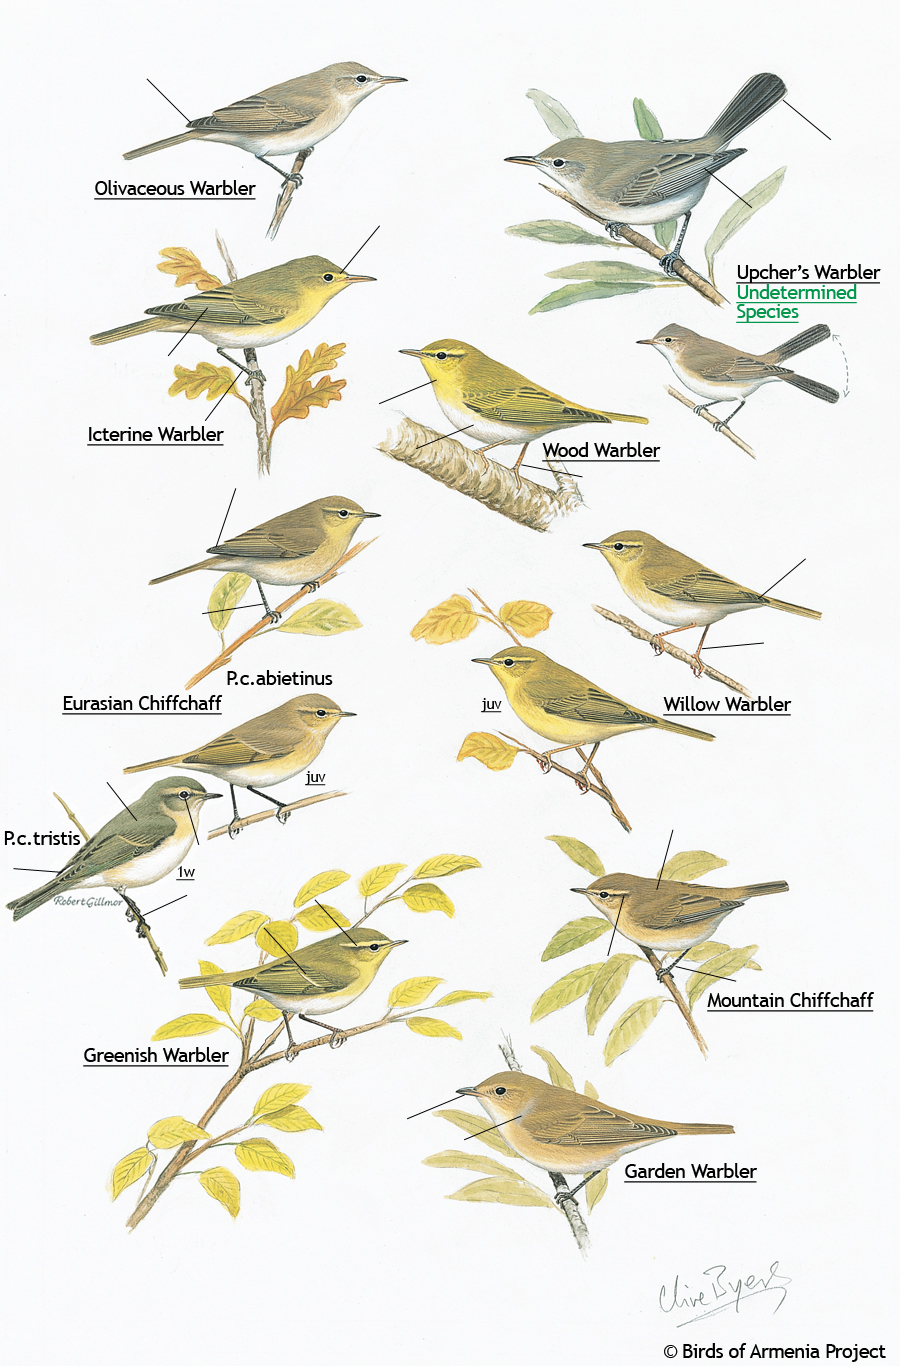 Warblers and Chiffchaffs